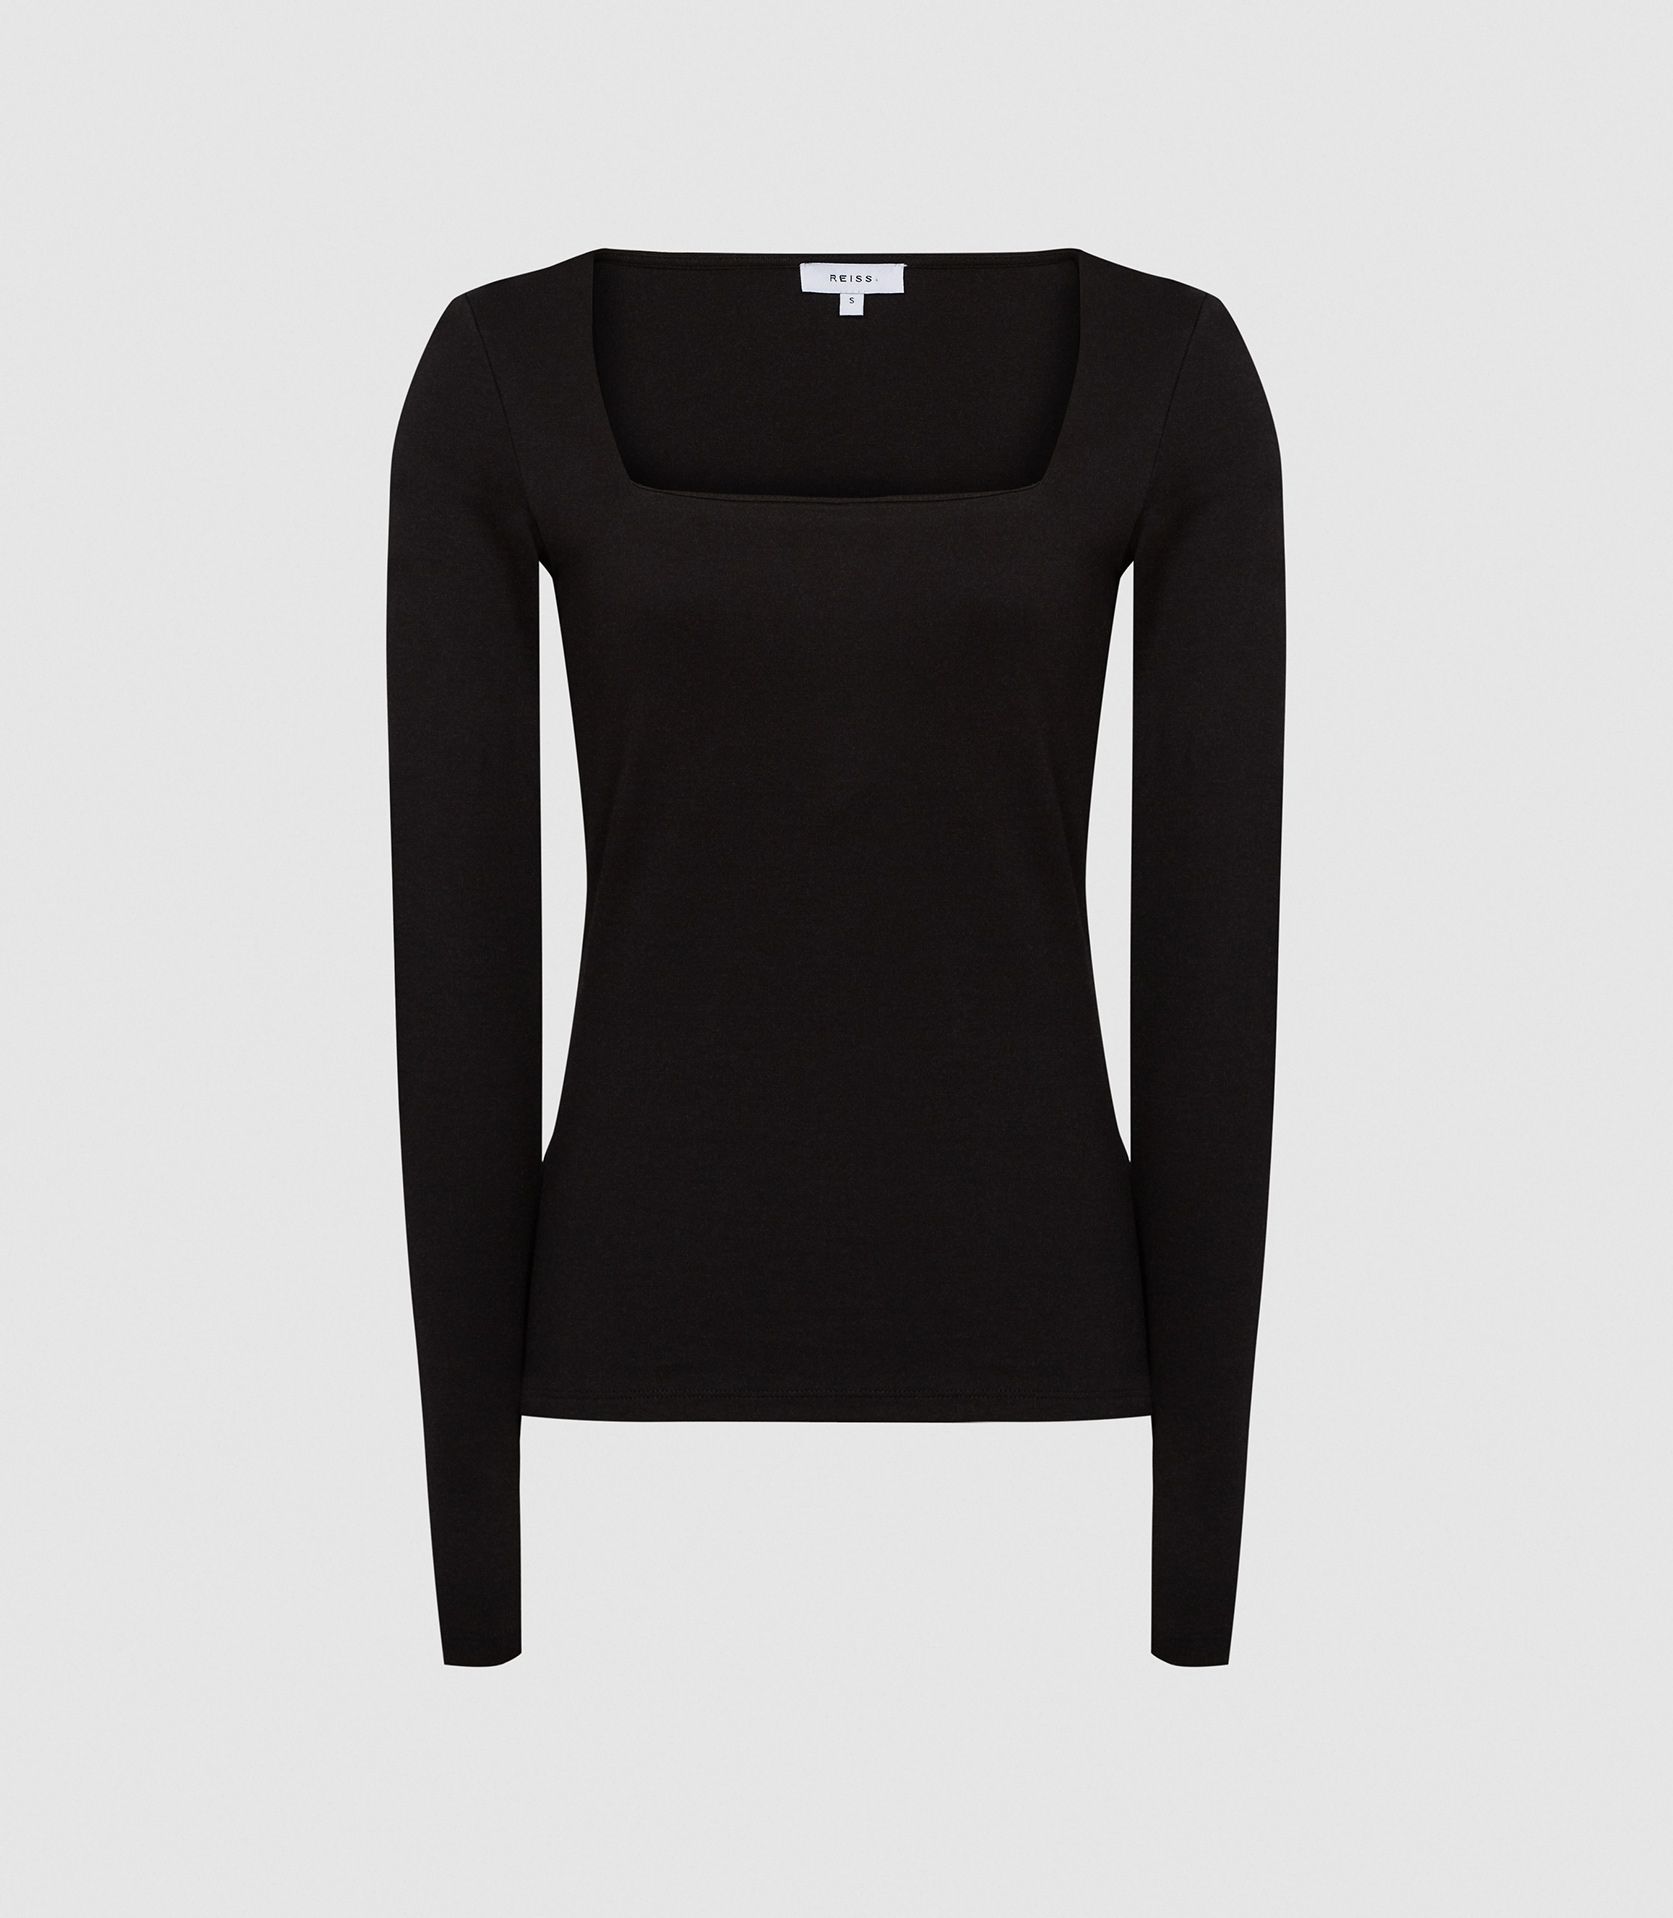 Reiss Beatrice Square Neck Jersey Top